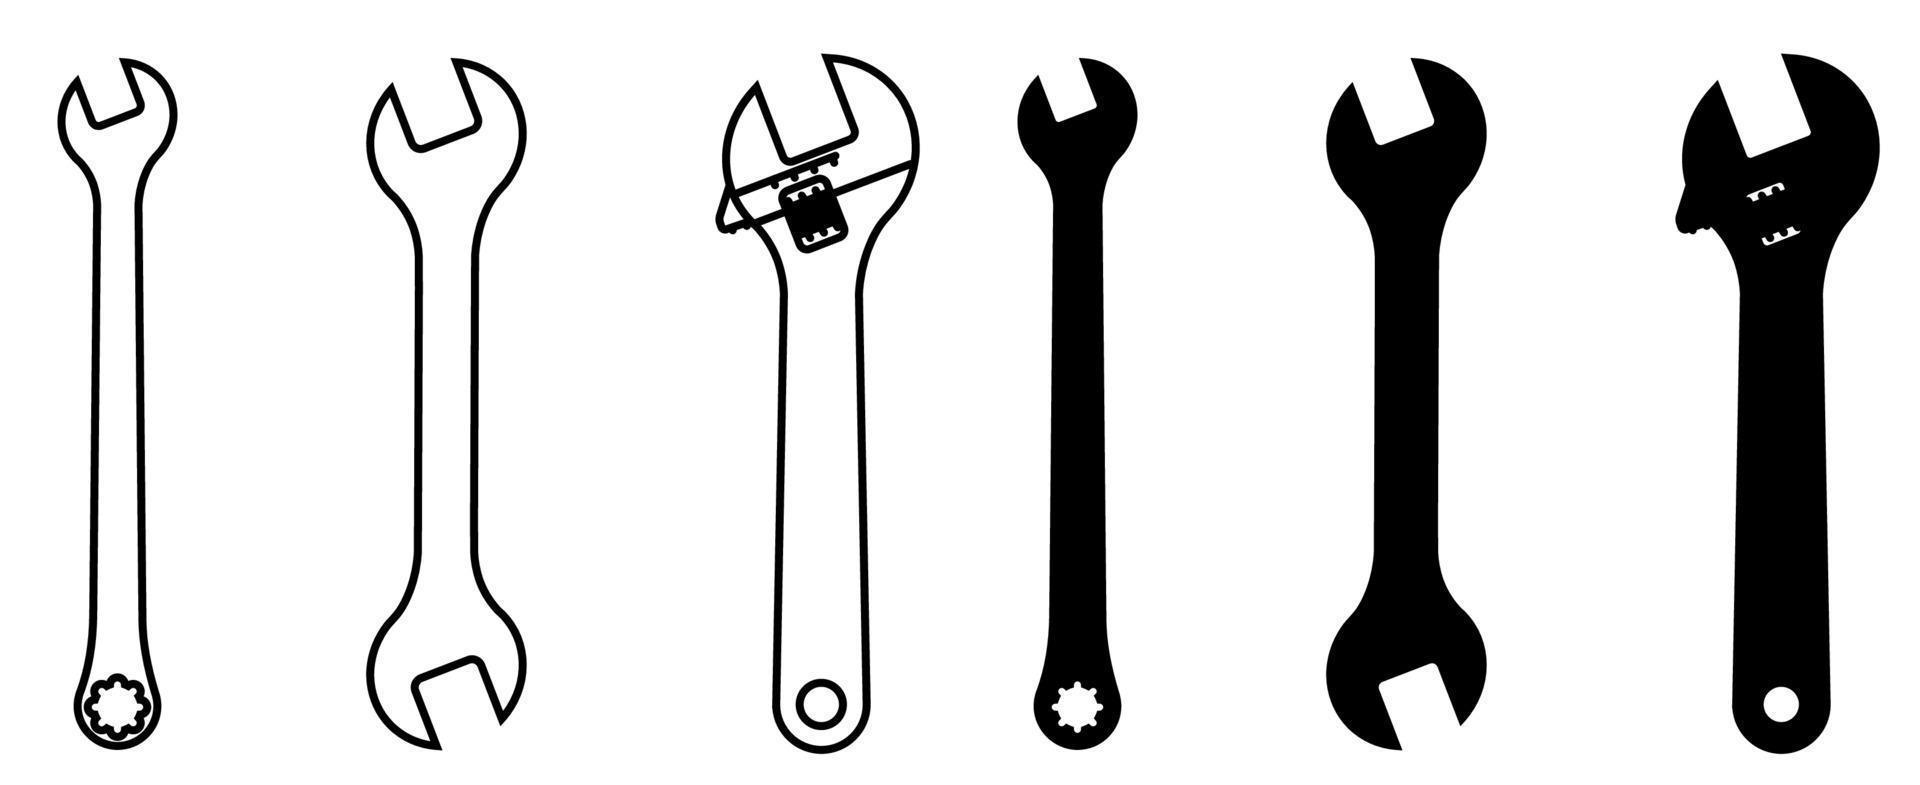 wrenches for repair of various shapes. black and white icons set vector